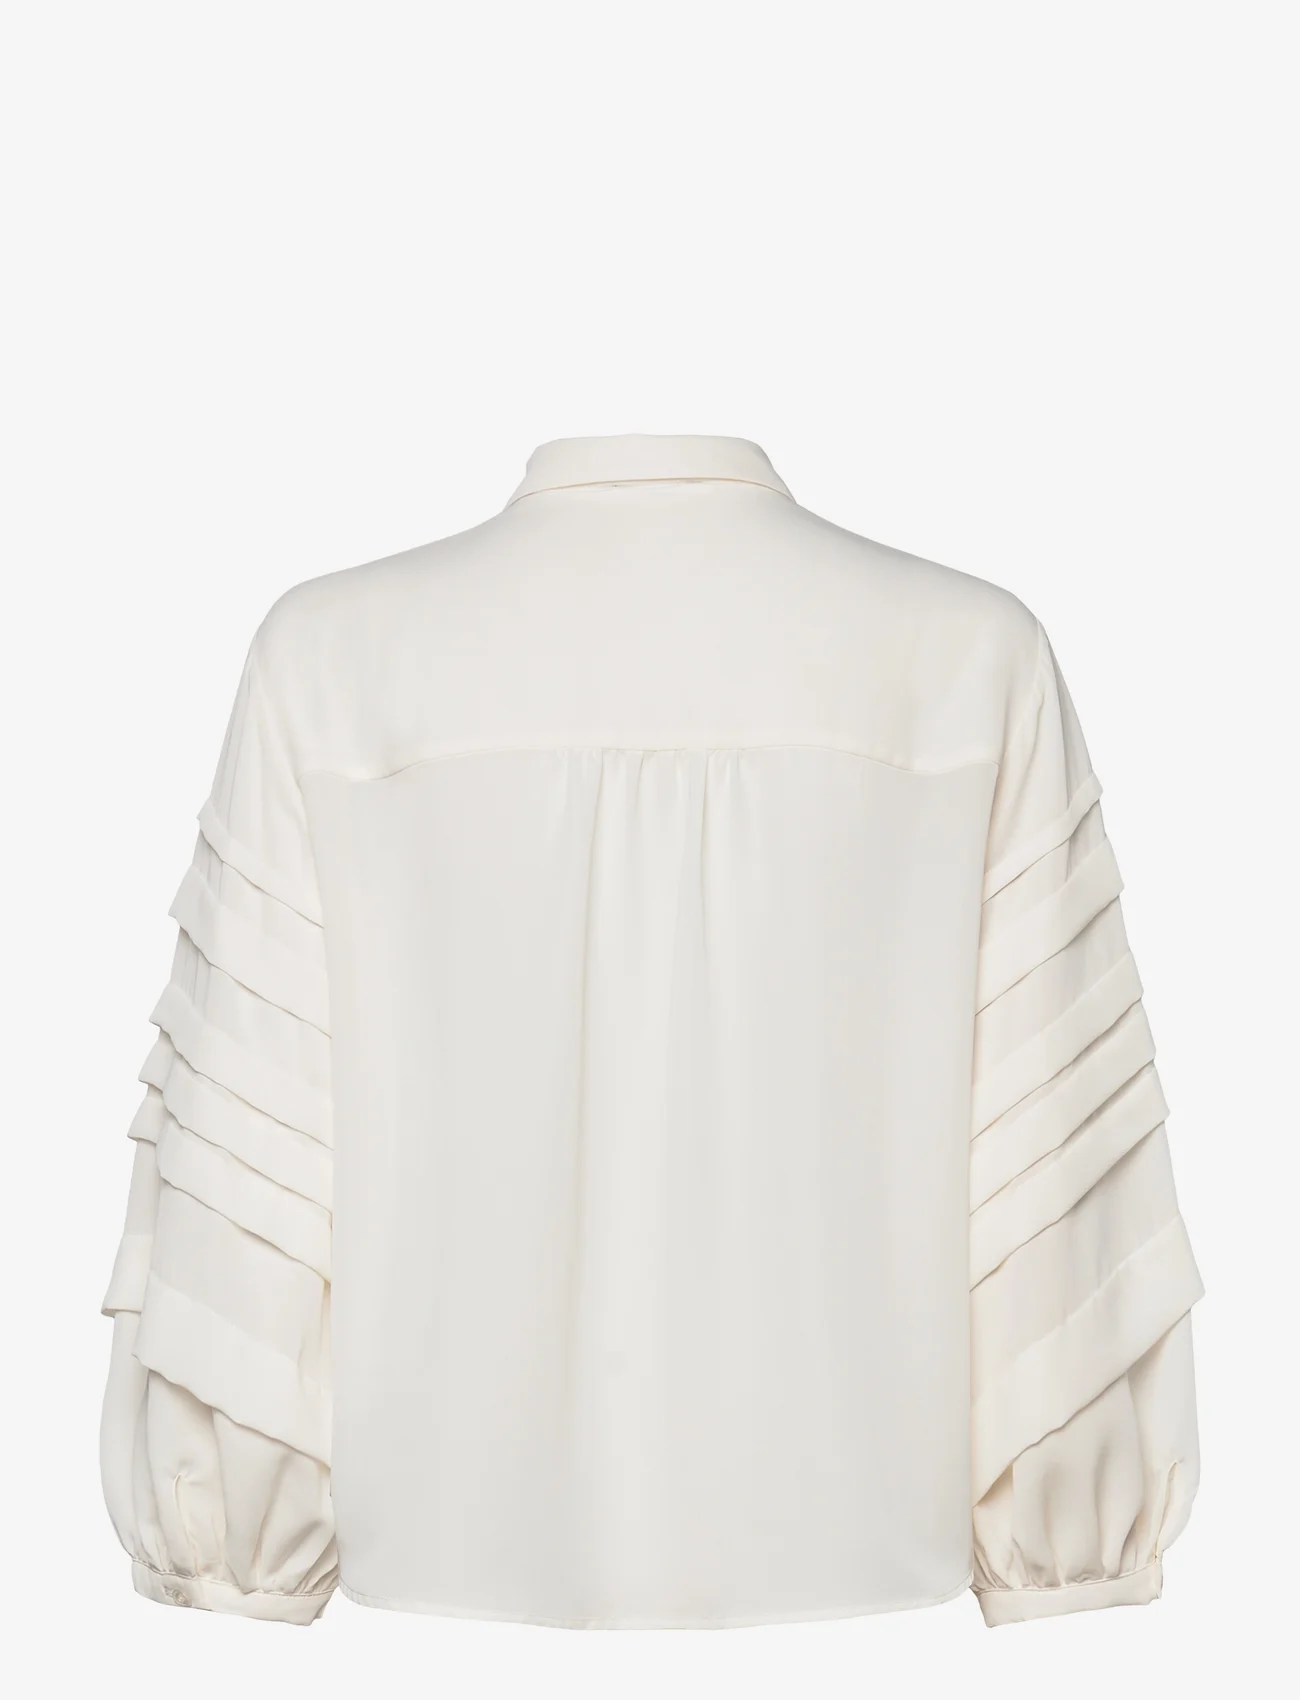 Esprit Collection - Women Blouses woven long sleeve - long-sleeved blouses - off white - 1